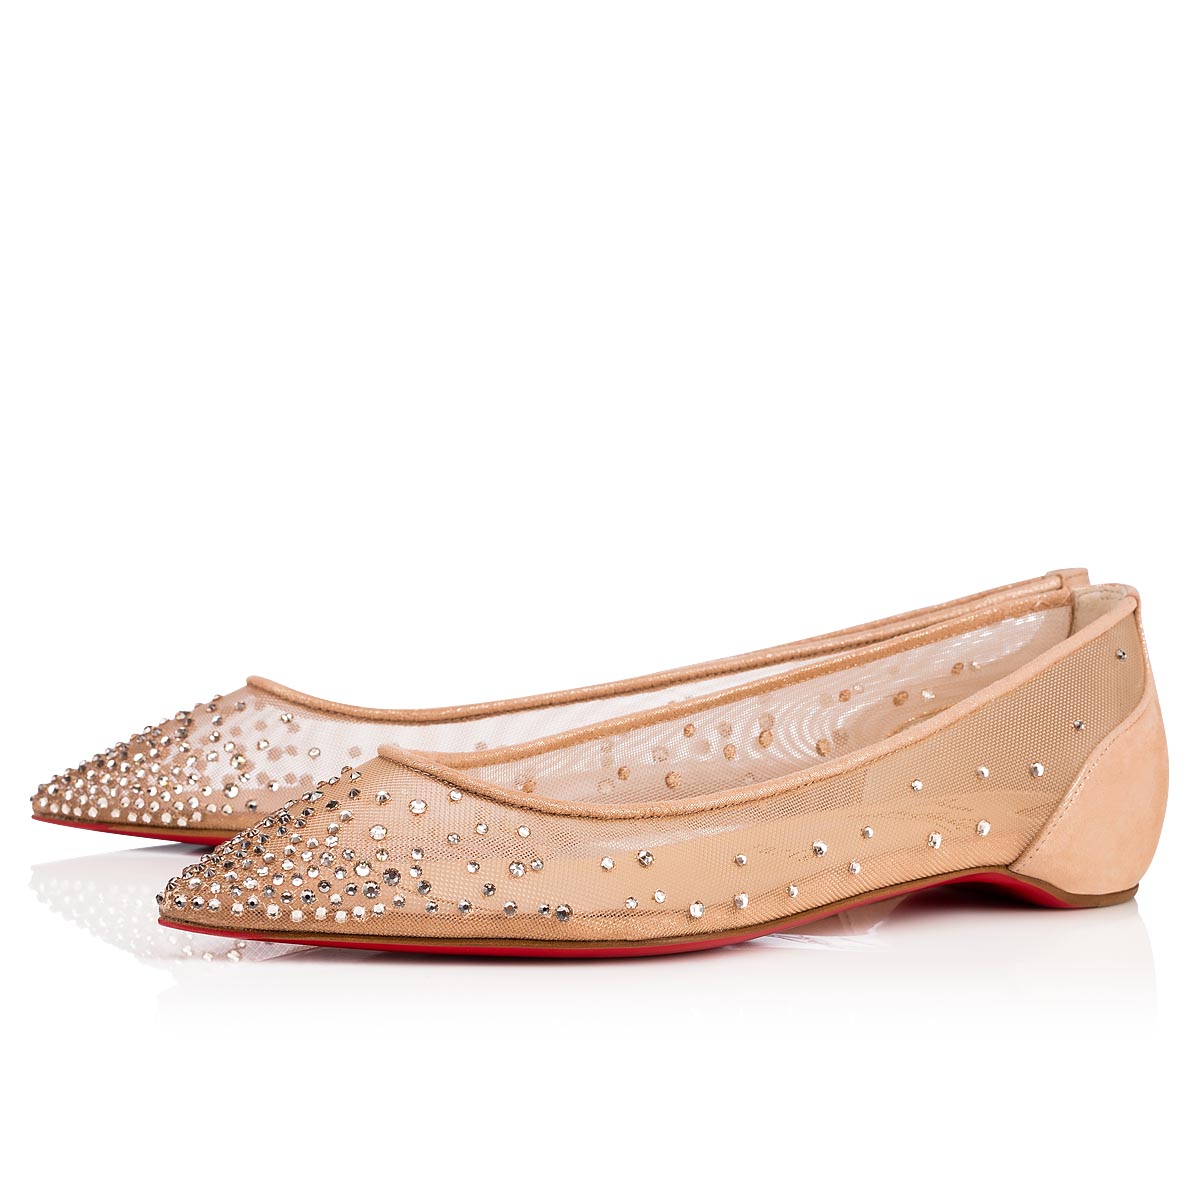 Follies Strass - Ballerinas - Mesh and suede Light Silk - Christian Louboutin United States